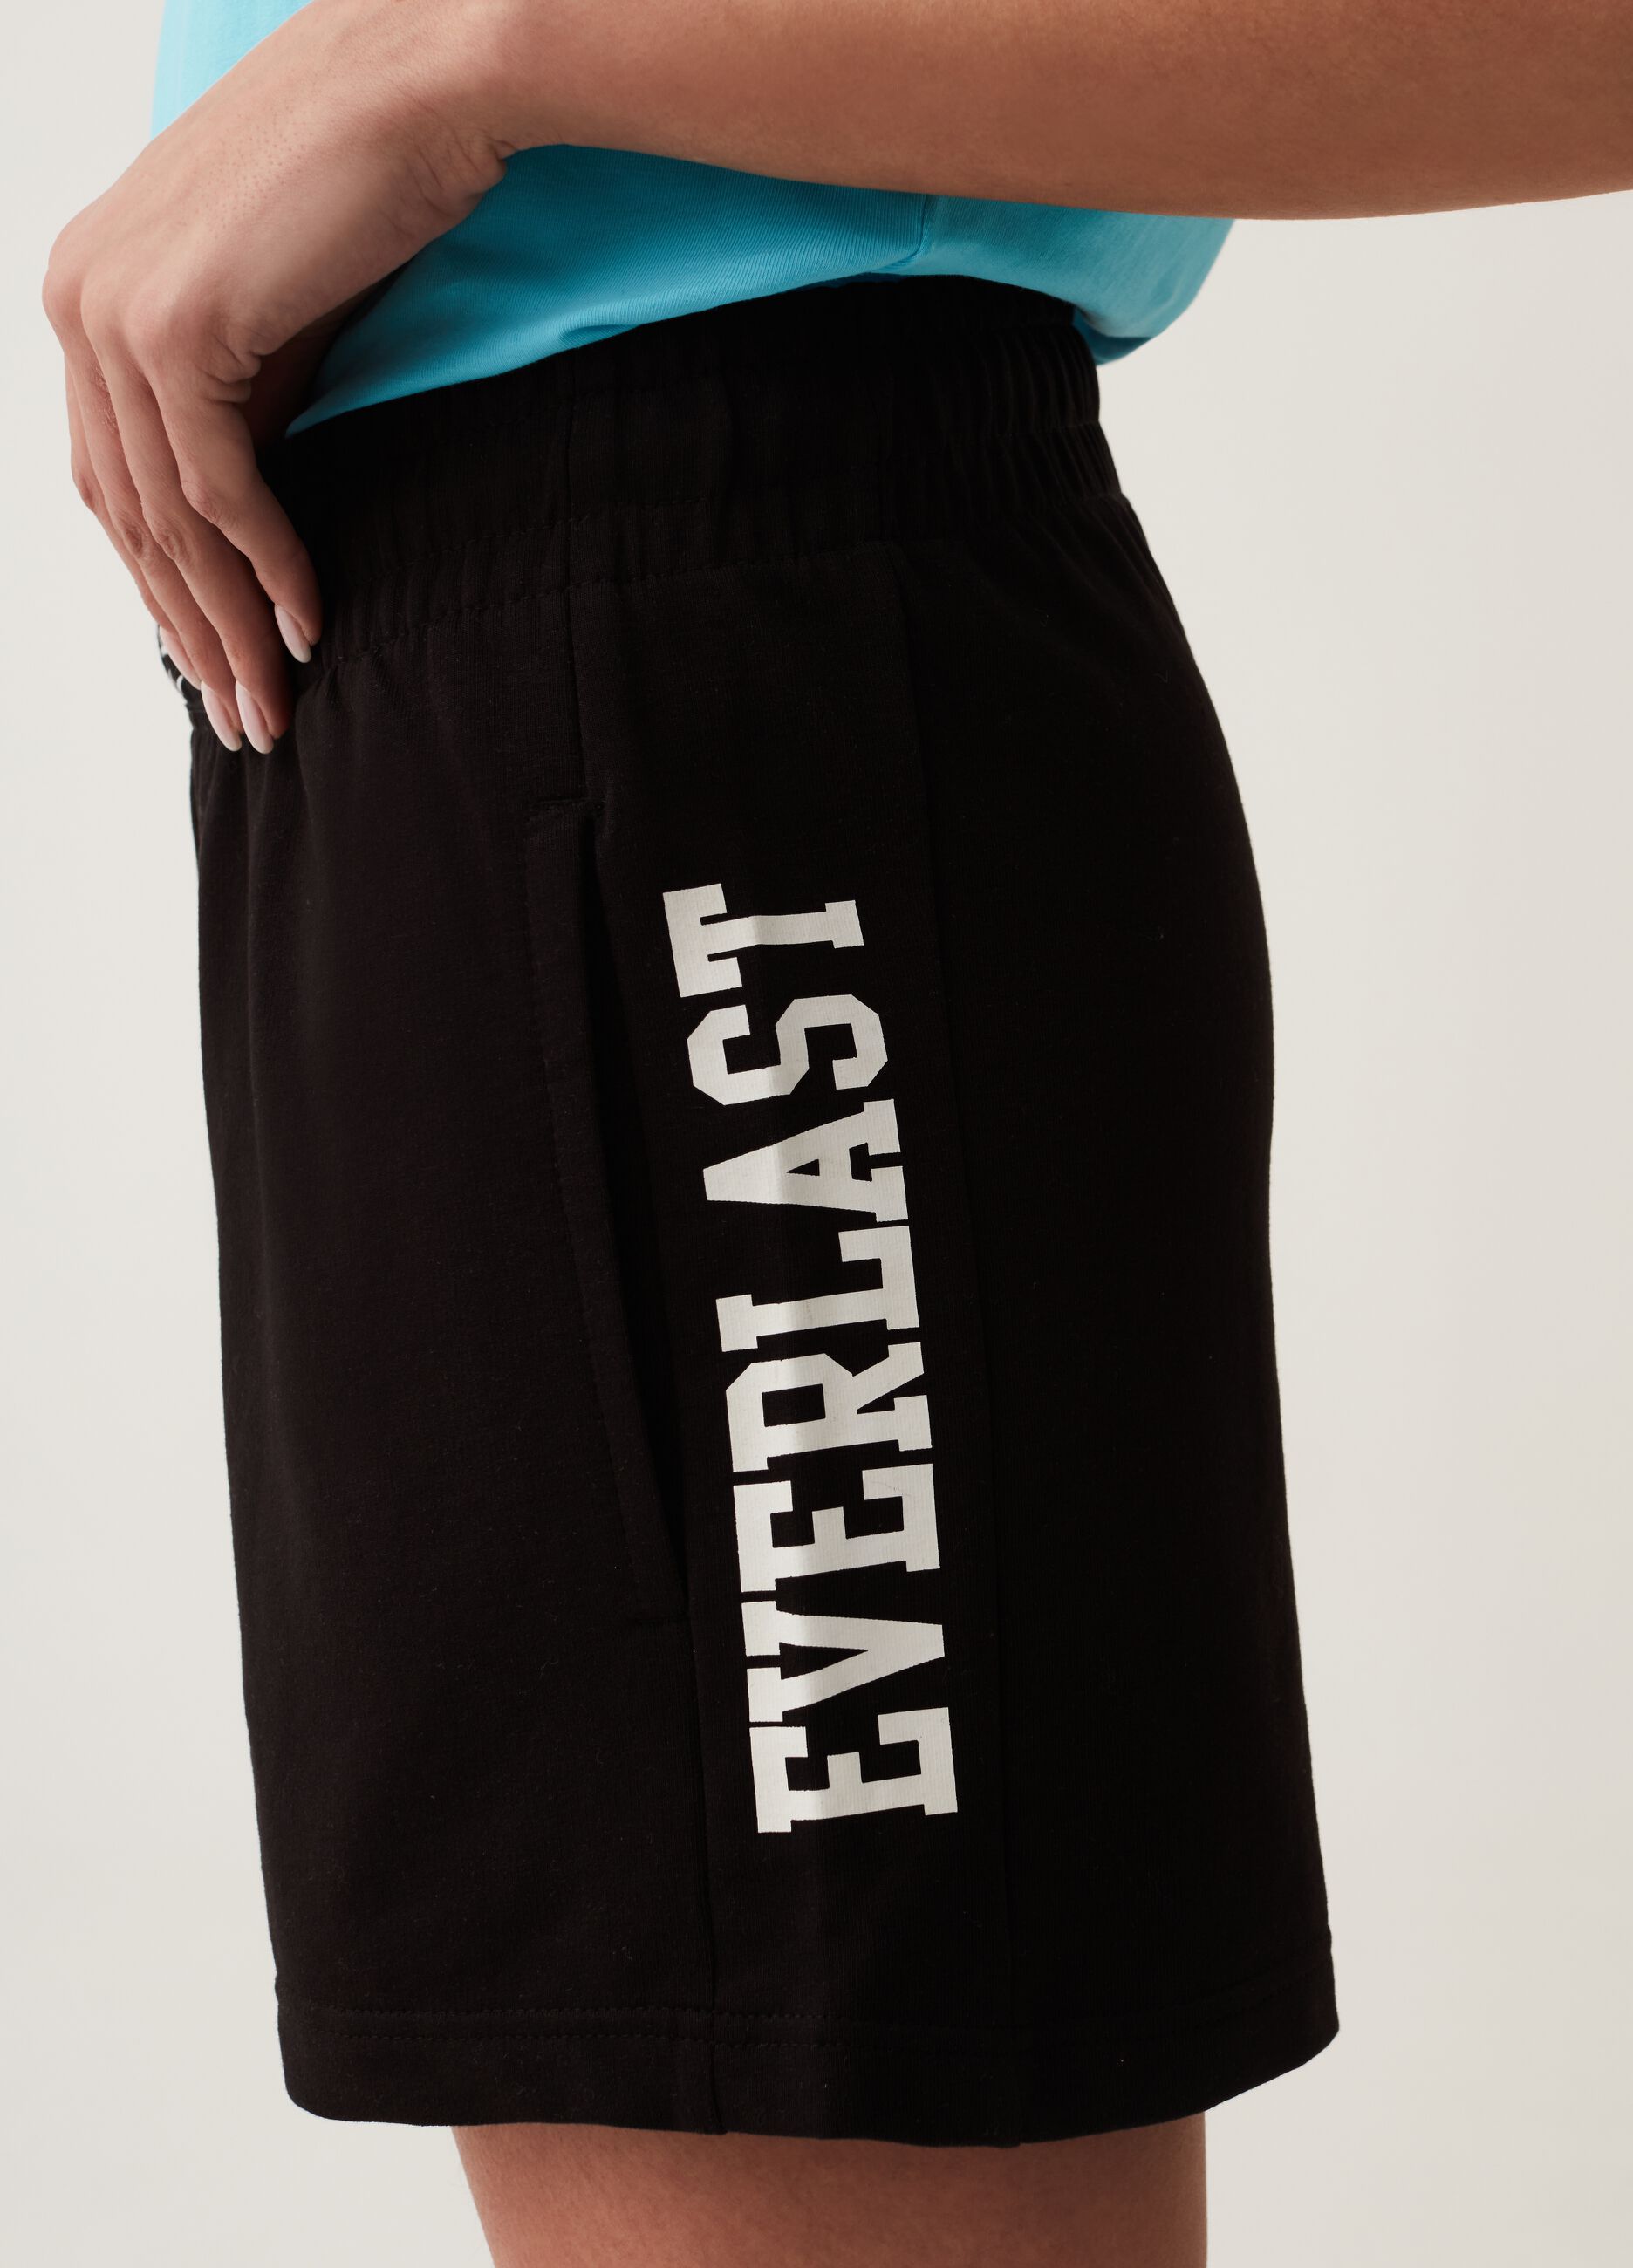 Shorts with Everlast print